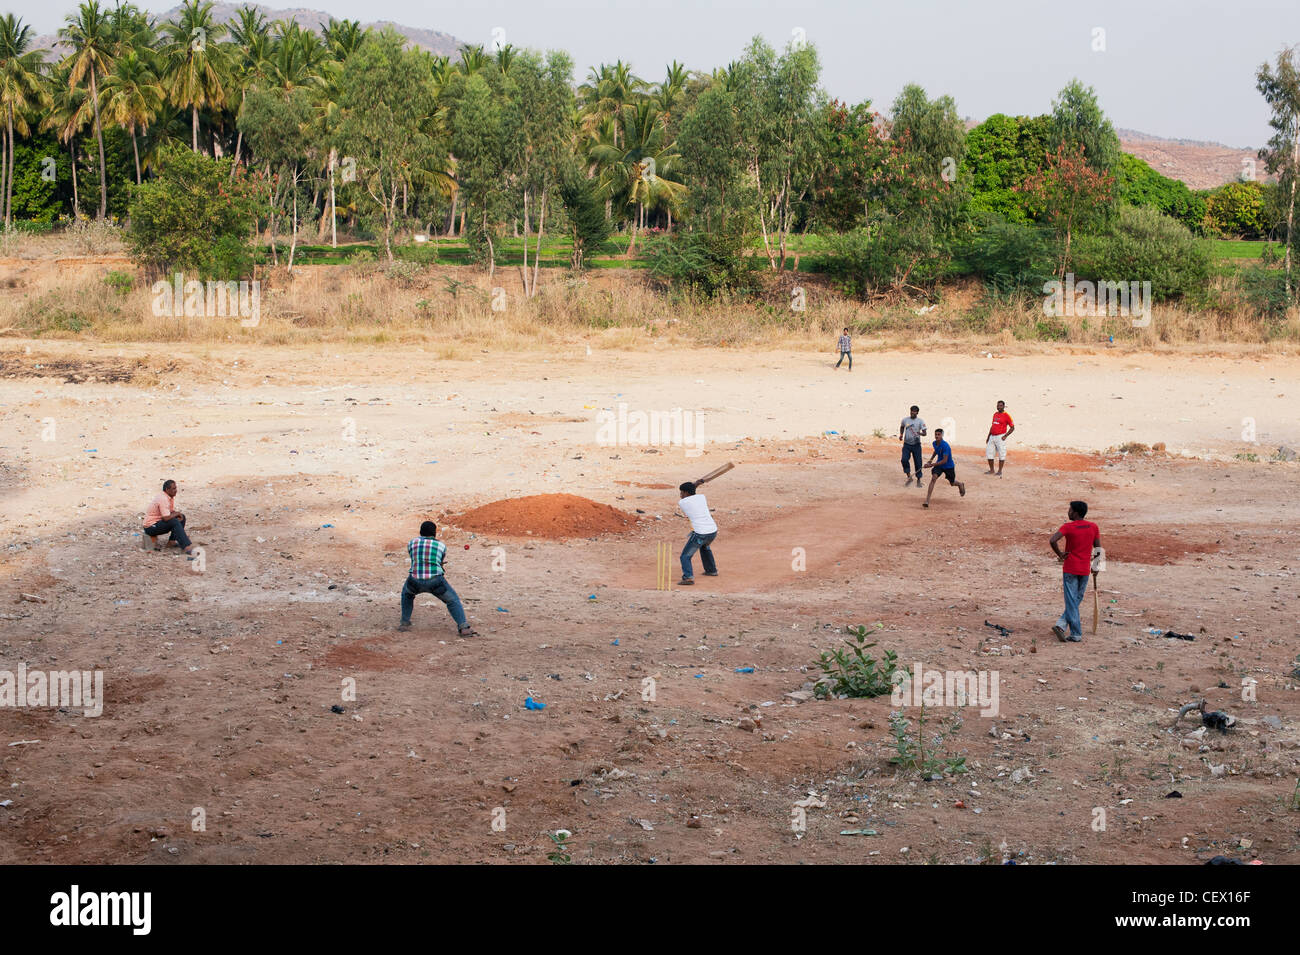 Indian boys playing cricket on a dry river bed in the rural Indian town of Puttaparthi, Andhra Pradesh, India Stock Photo